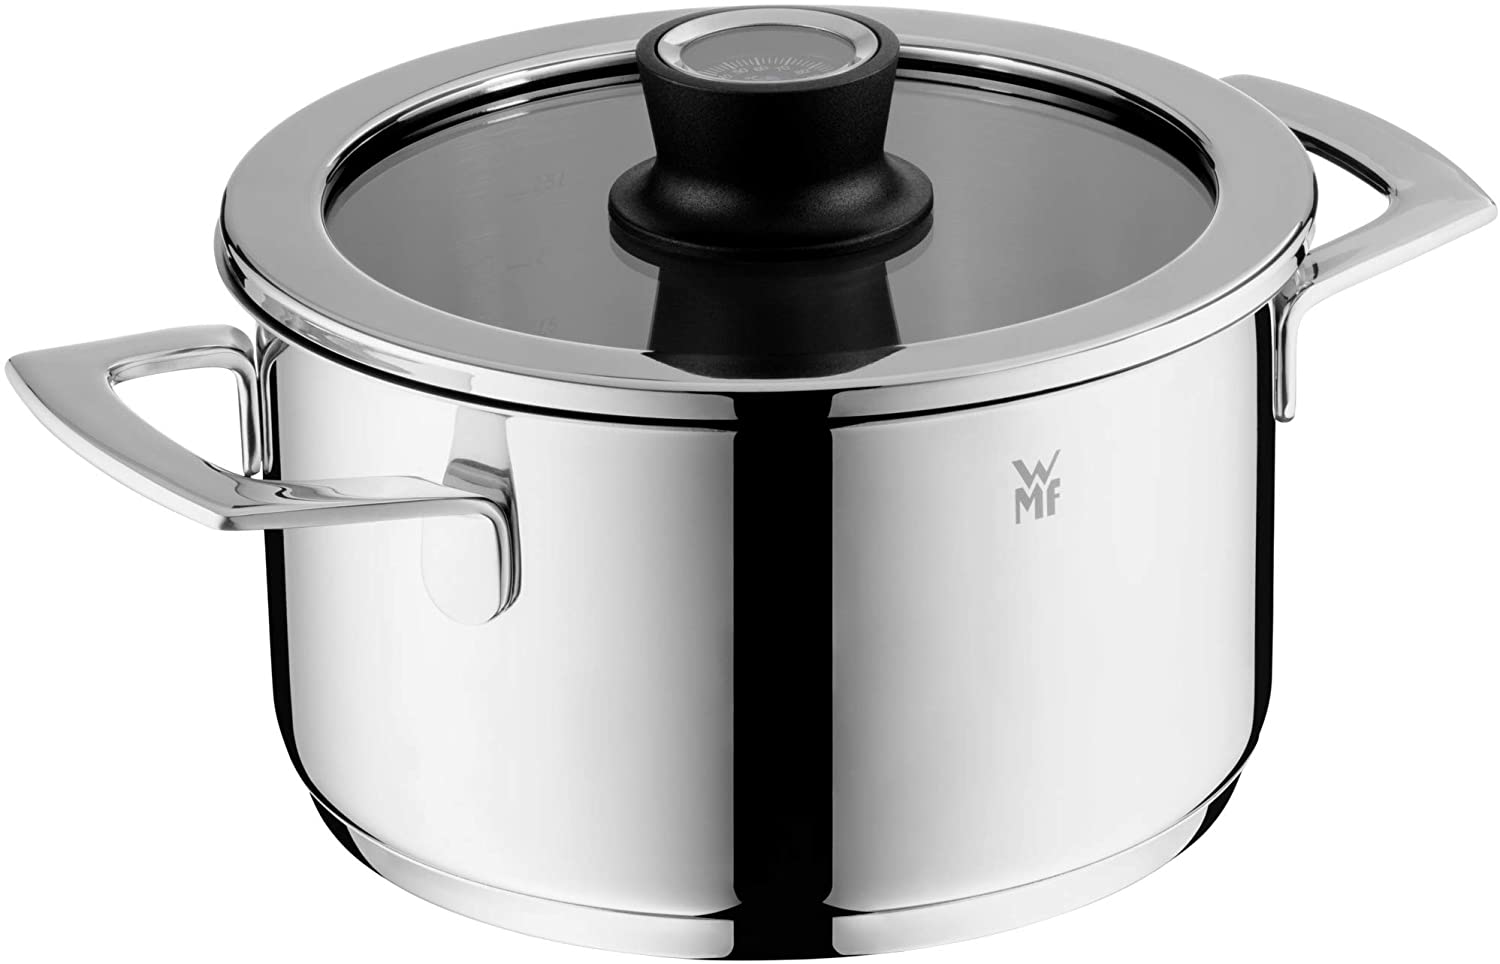 WMF VarioCuisine Cooking Pot Height 20 cm Silence Glass Lid Thermometer Cooking Pot 3.3 L Cromargan Polished Stainless Steel Pot Induction Uncoated